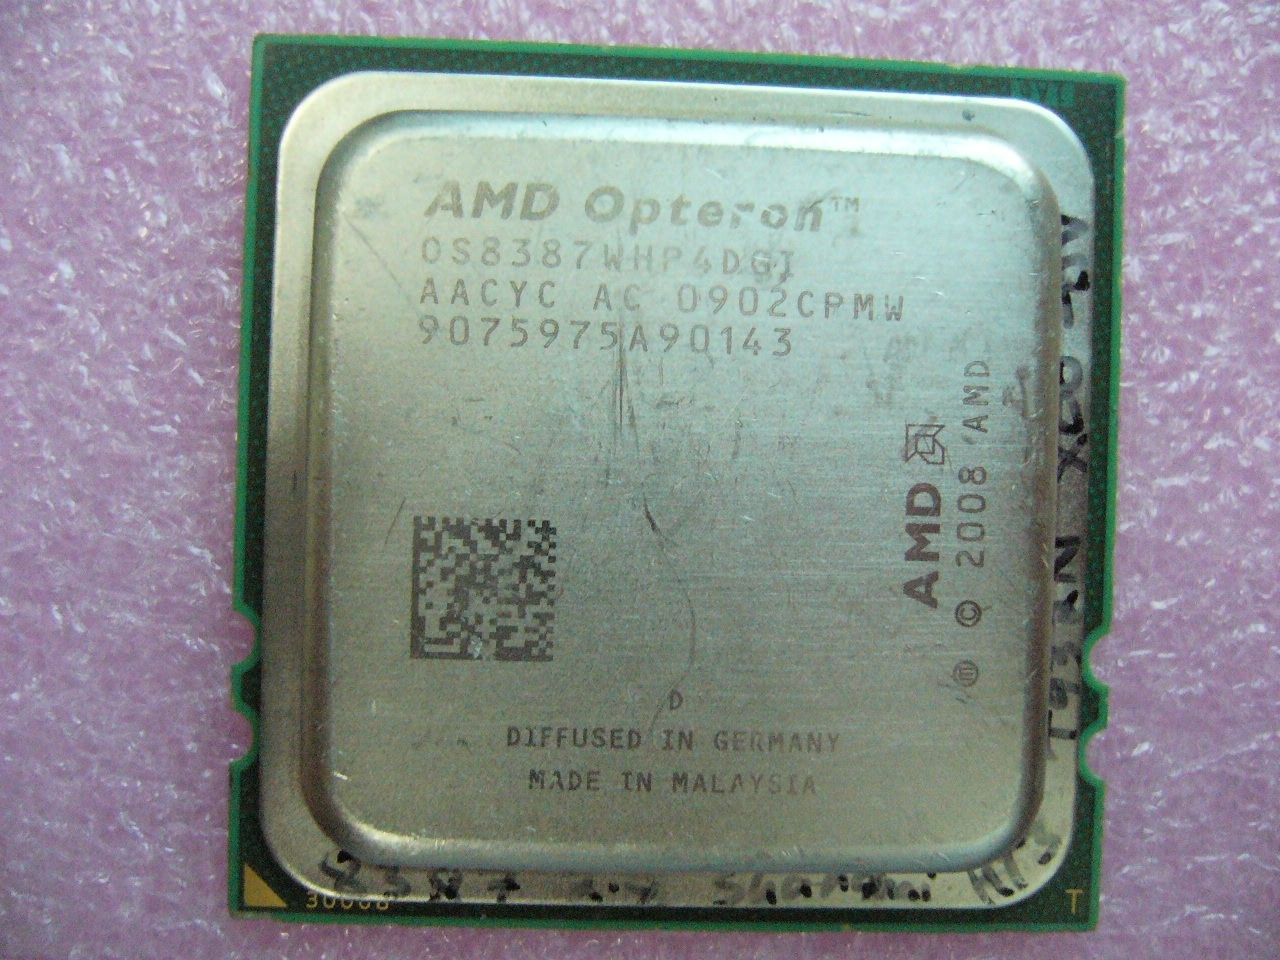 QTY 1x AMD Opteron 8387 2.8 GHz Quad-Core (OS8387WHP4DG) CPU Socket F 1207 - Click Image to Close